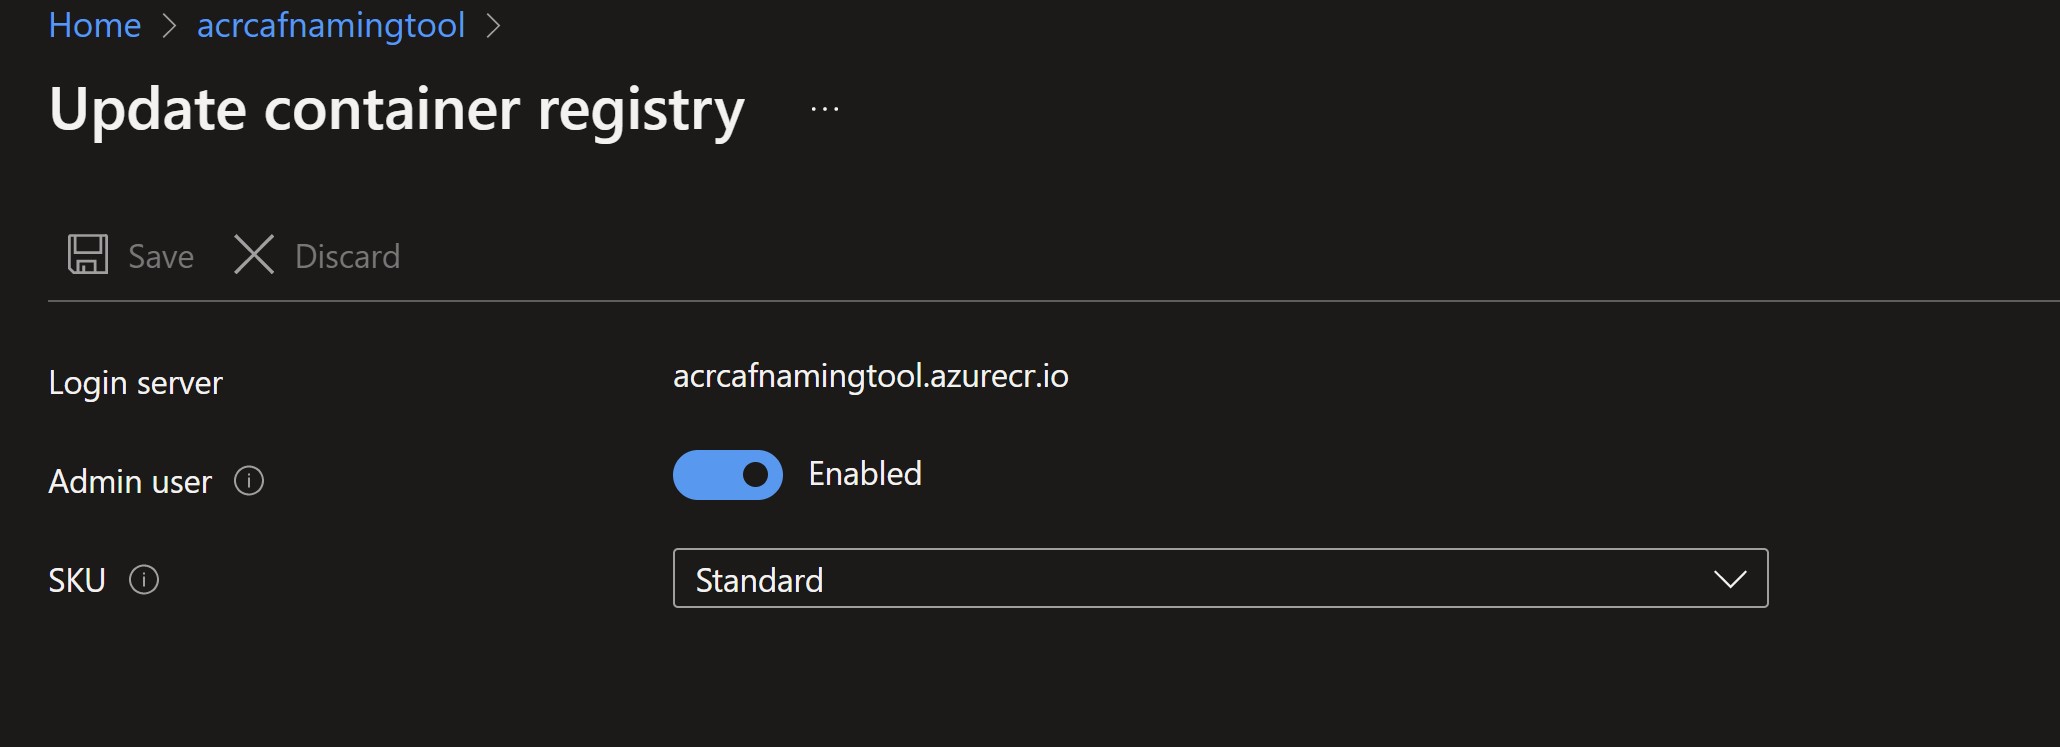 Screenshot showing Azure Container registry with the admin user enabled